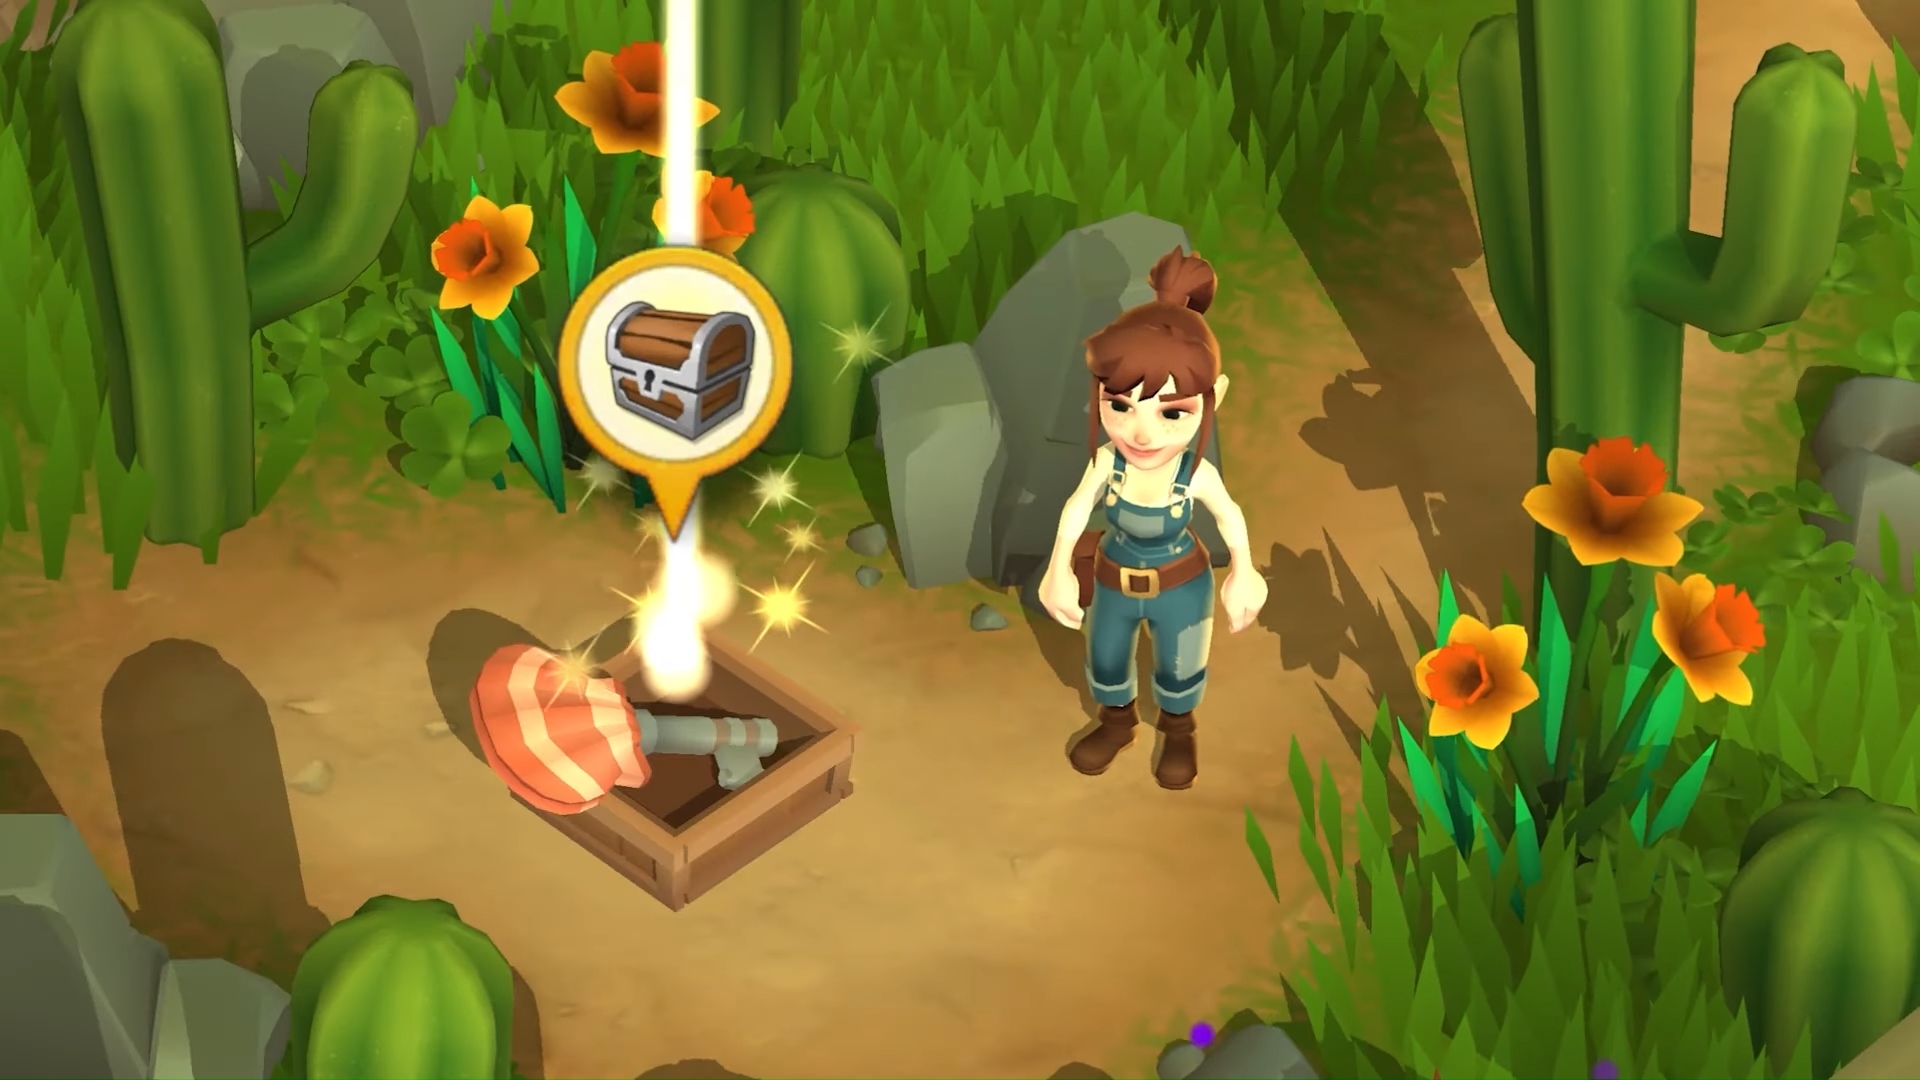 Gardening games - Sunrise Village. A screenshot shows the character standing in a crass area near buried treasure.